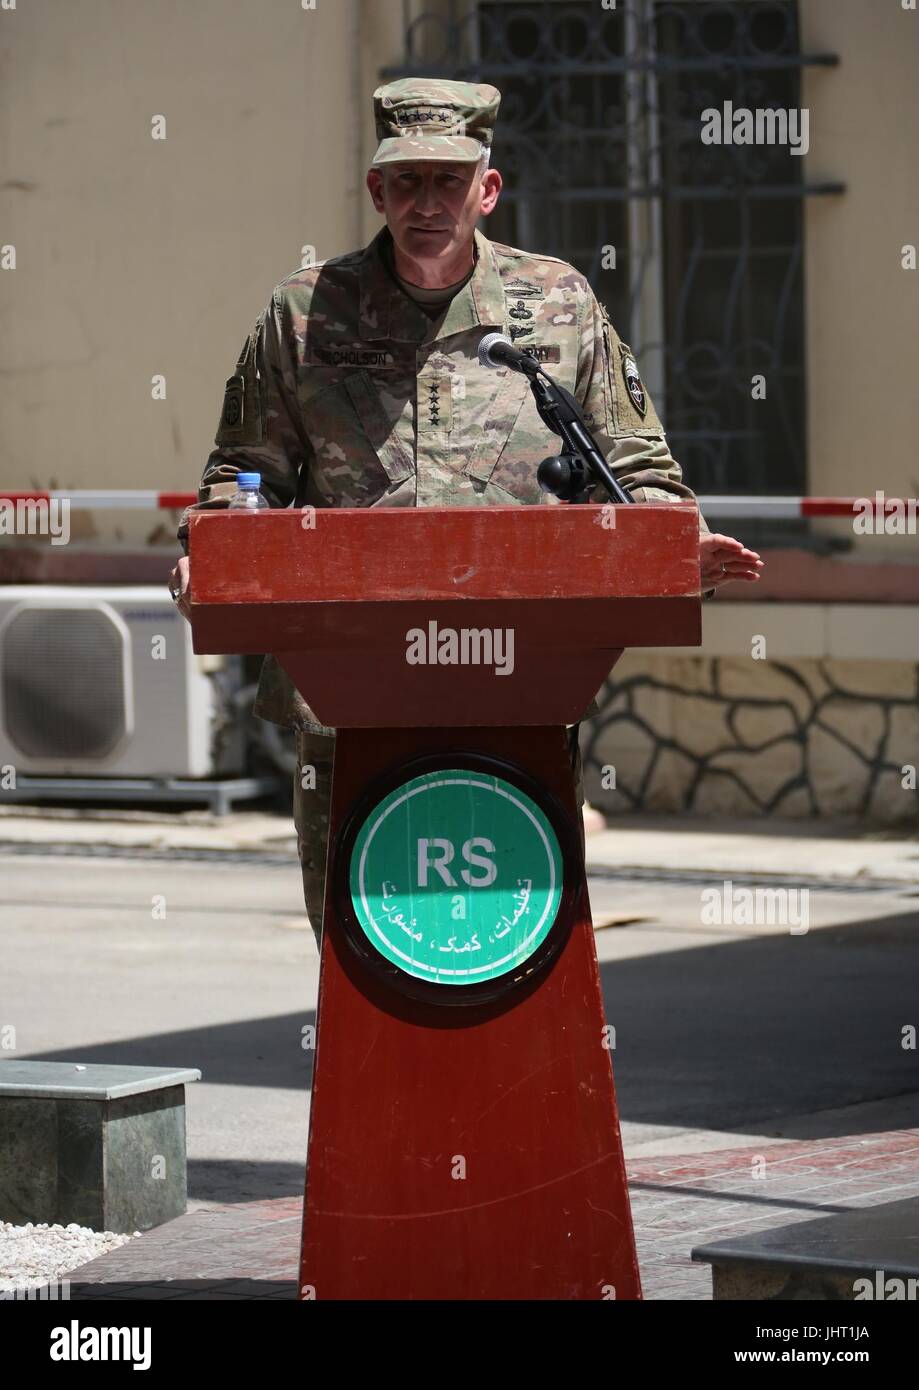 (170715) -- KABUL, July 15 (Xinhua) -- General John Nicholson, the U.S. and NATO commander in Afghanistan, speaks during change of command ceremony in Resolute Support headquarter in Kabul, Afghanistan, July 15, 2017. (Xinhua/Rahmat Alizadah)(rh) Stock Photo